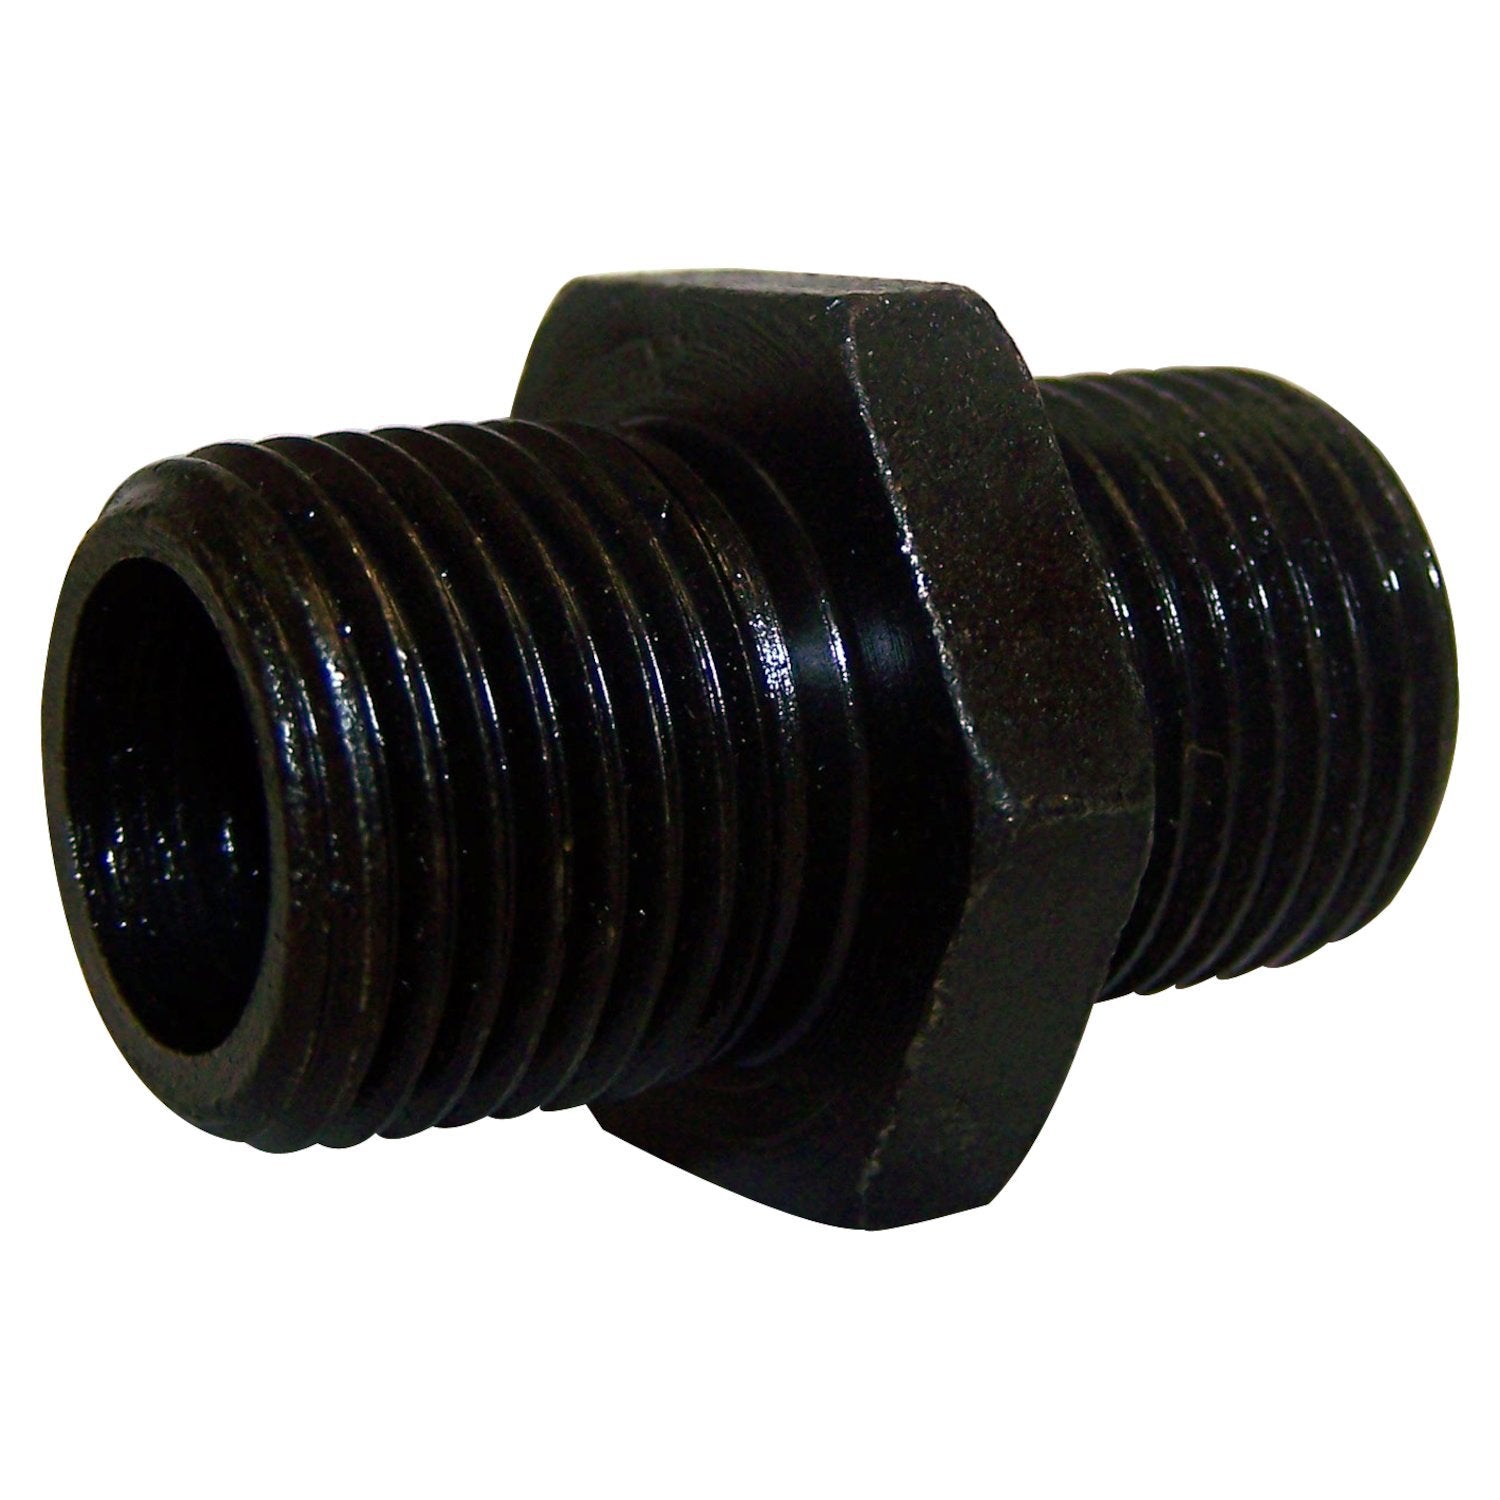 Oil Filter Connector for Numerous Jeep, Dodge, Chrysler & Ram Models